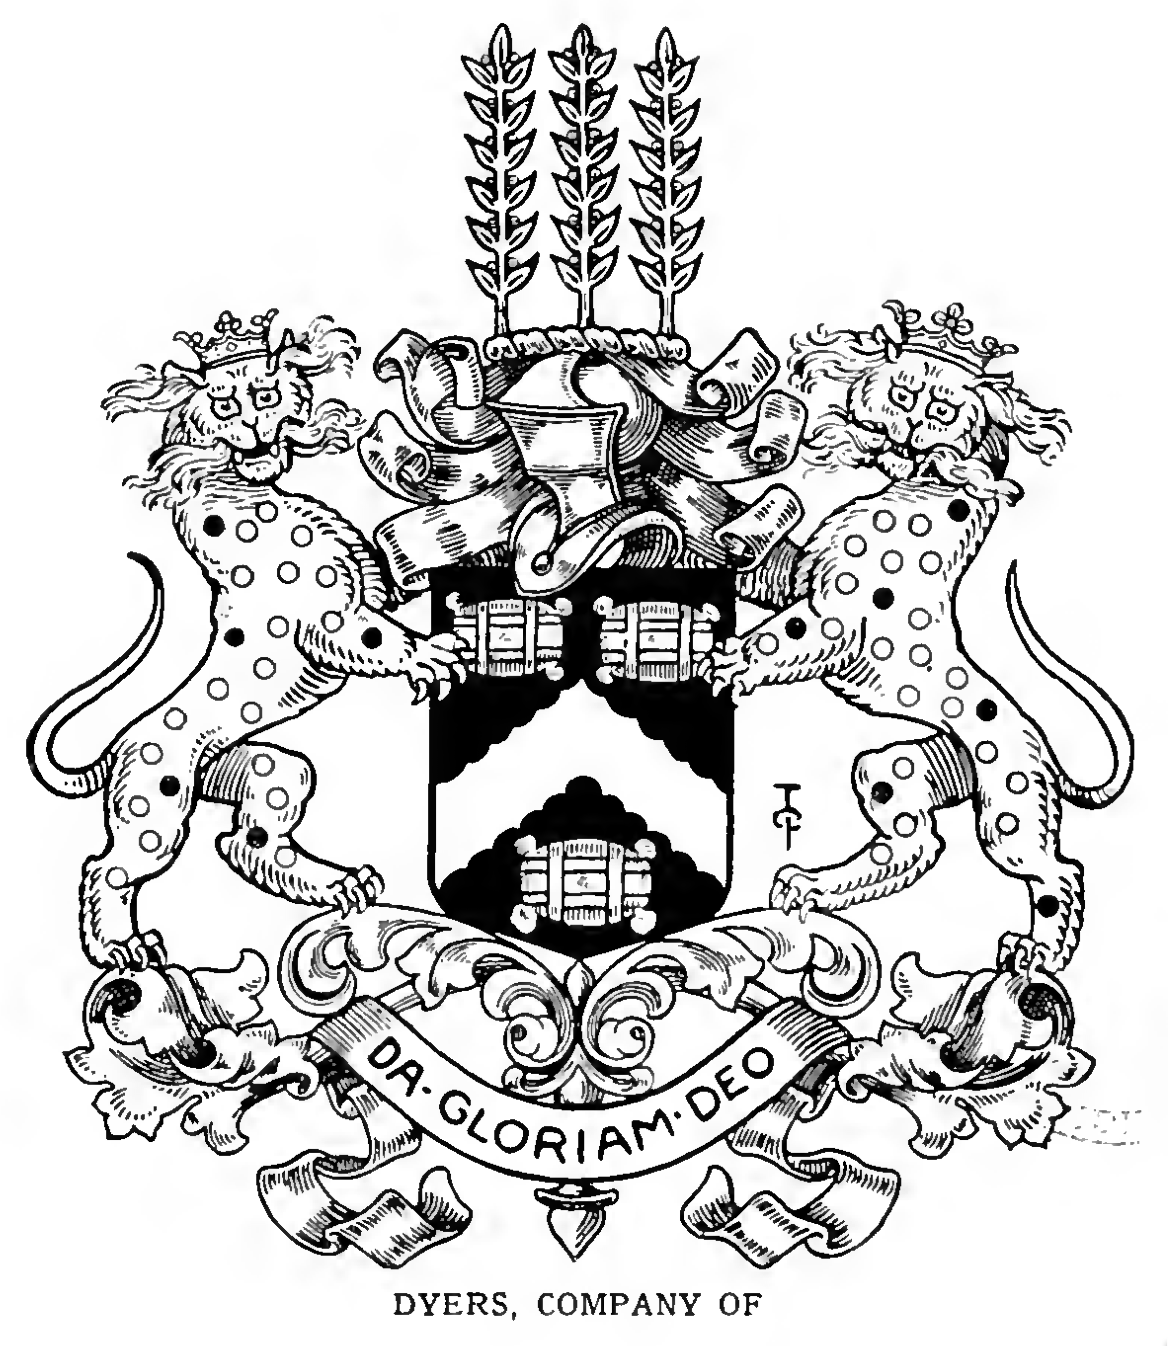 DYERS, The Worshipful Company of (London).